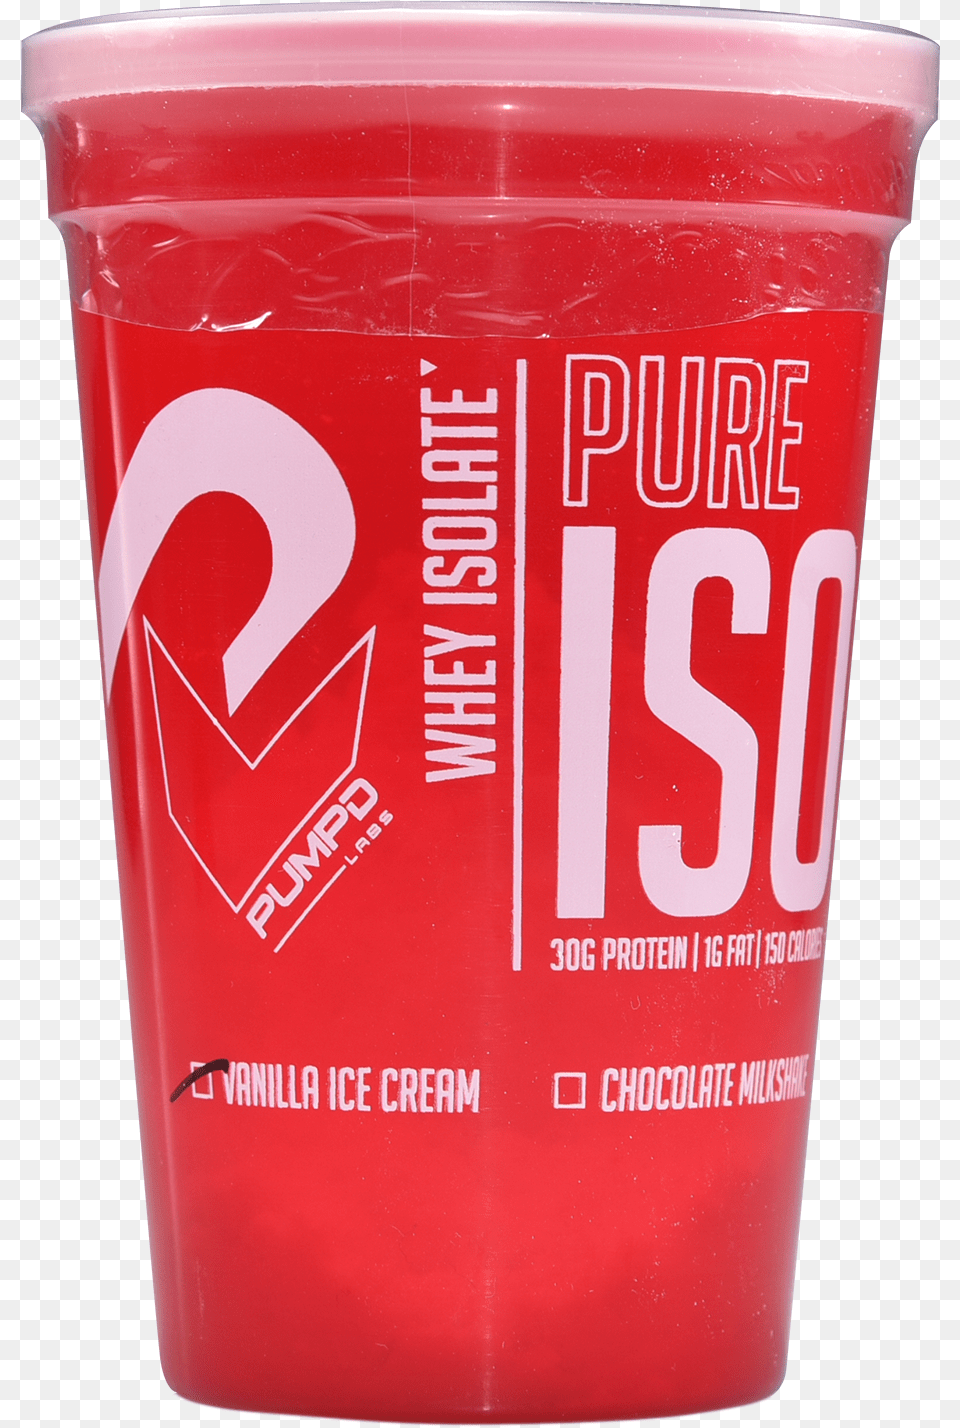 Pure Iso Sample 2 Cups For 5 Box, Cup, Can, Tin Png Image